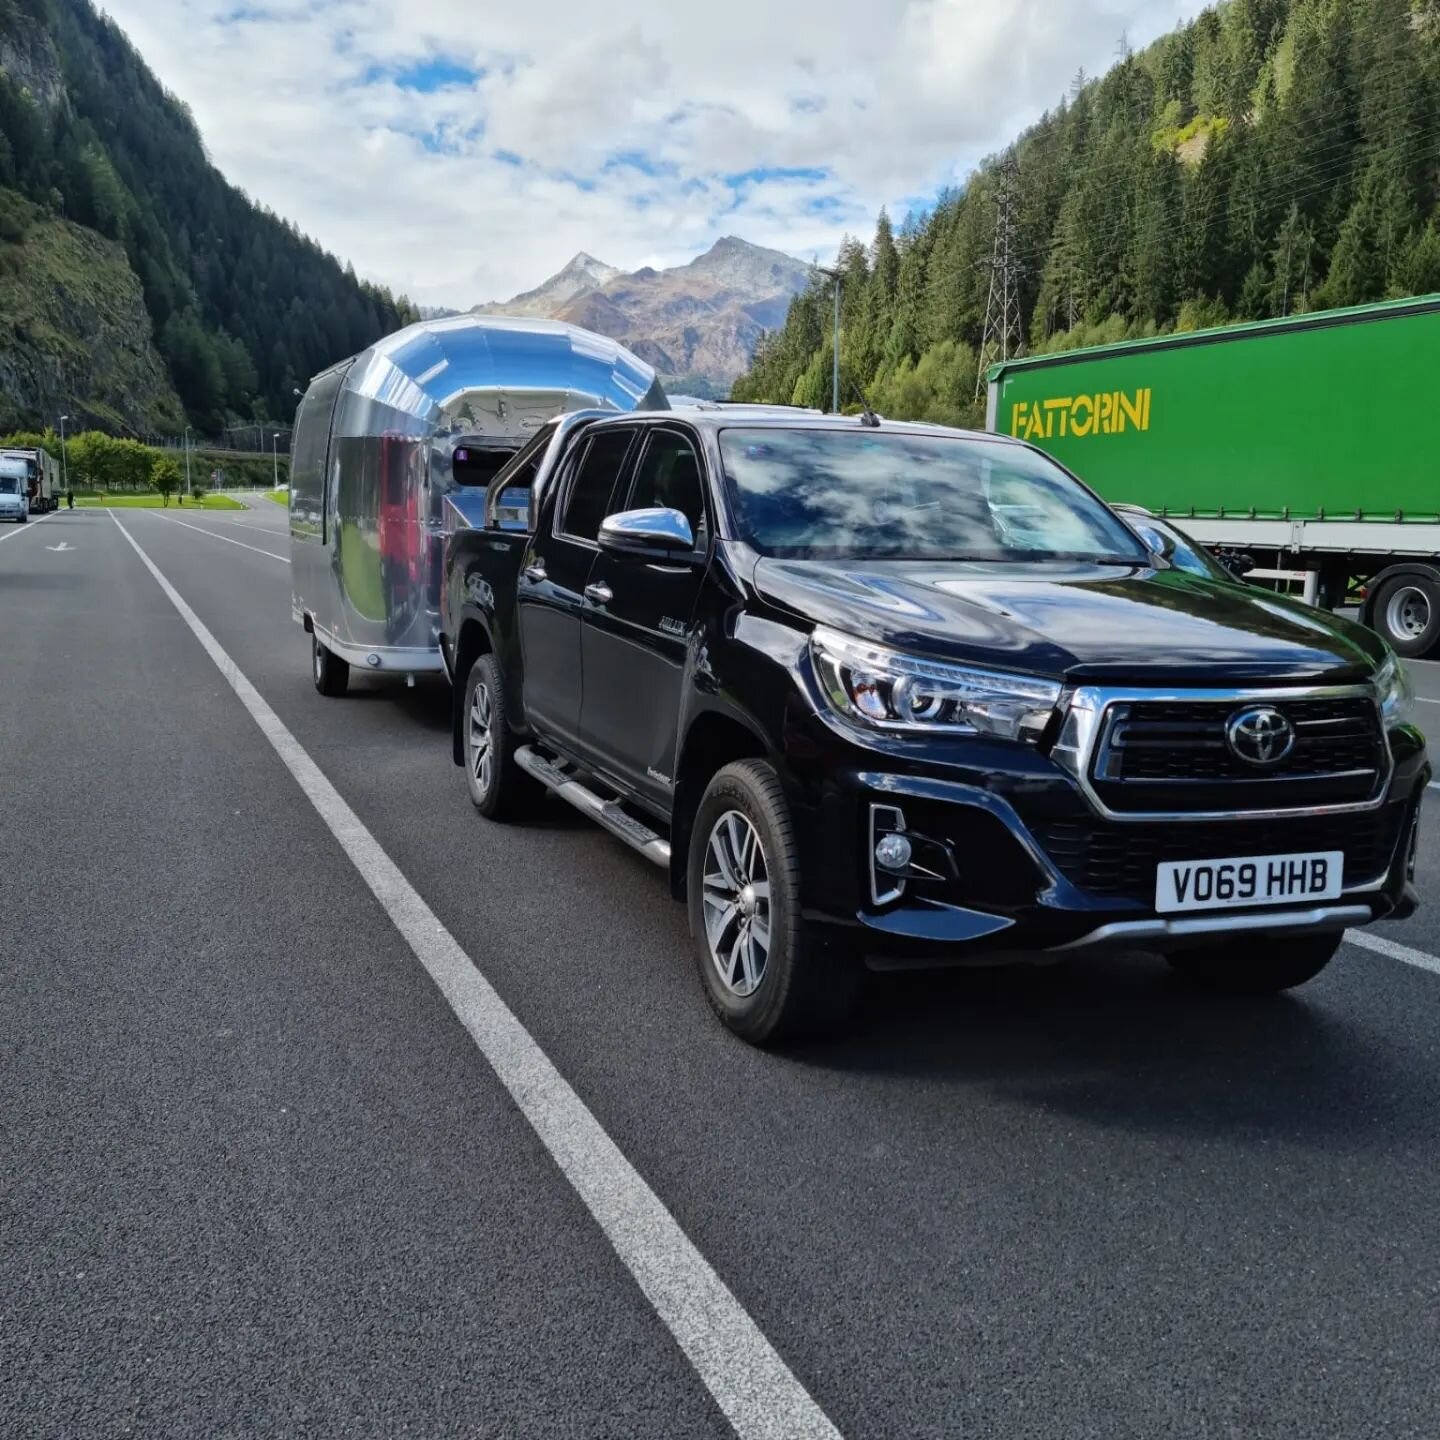 Out delivering our 17ft trailer with black and copper interior.... all the way to Corfu! Passing through Switzerland this morning what a view⛰️🛻

#catering #vintage #airstream #foodie #streetfood